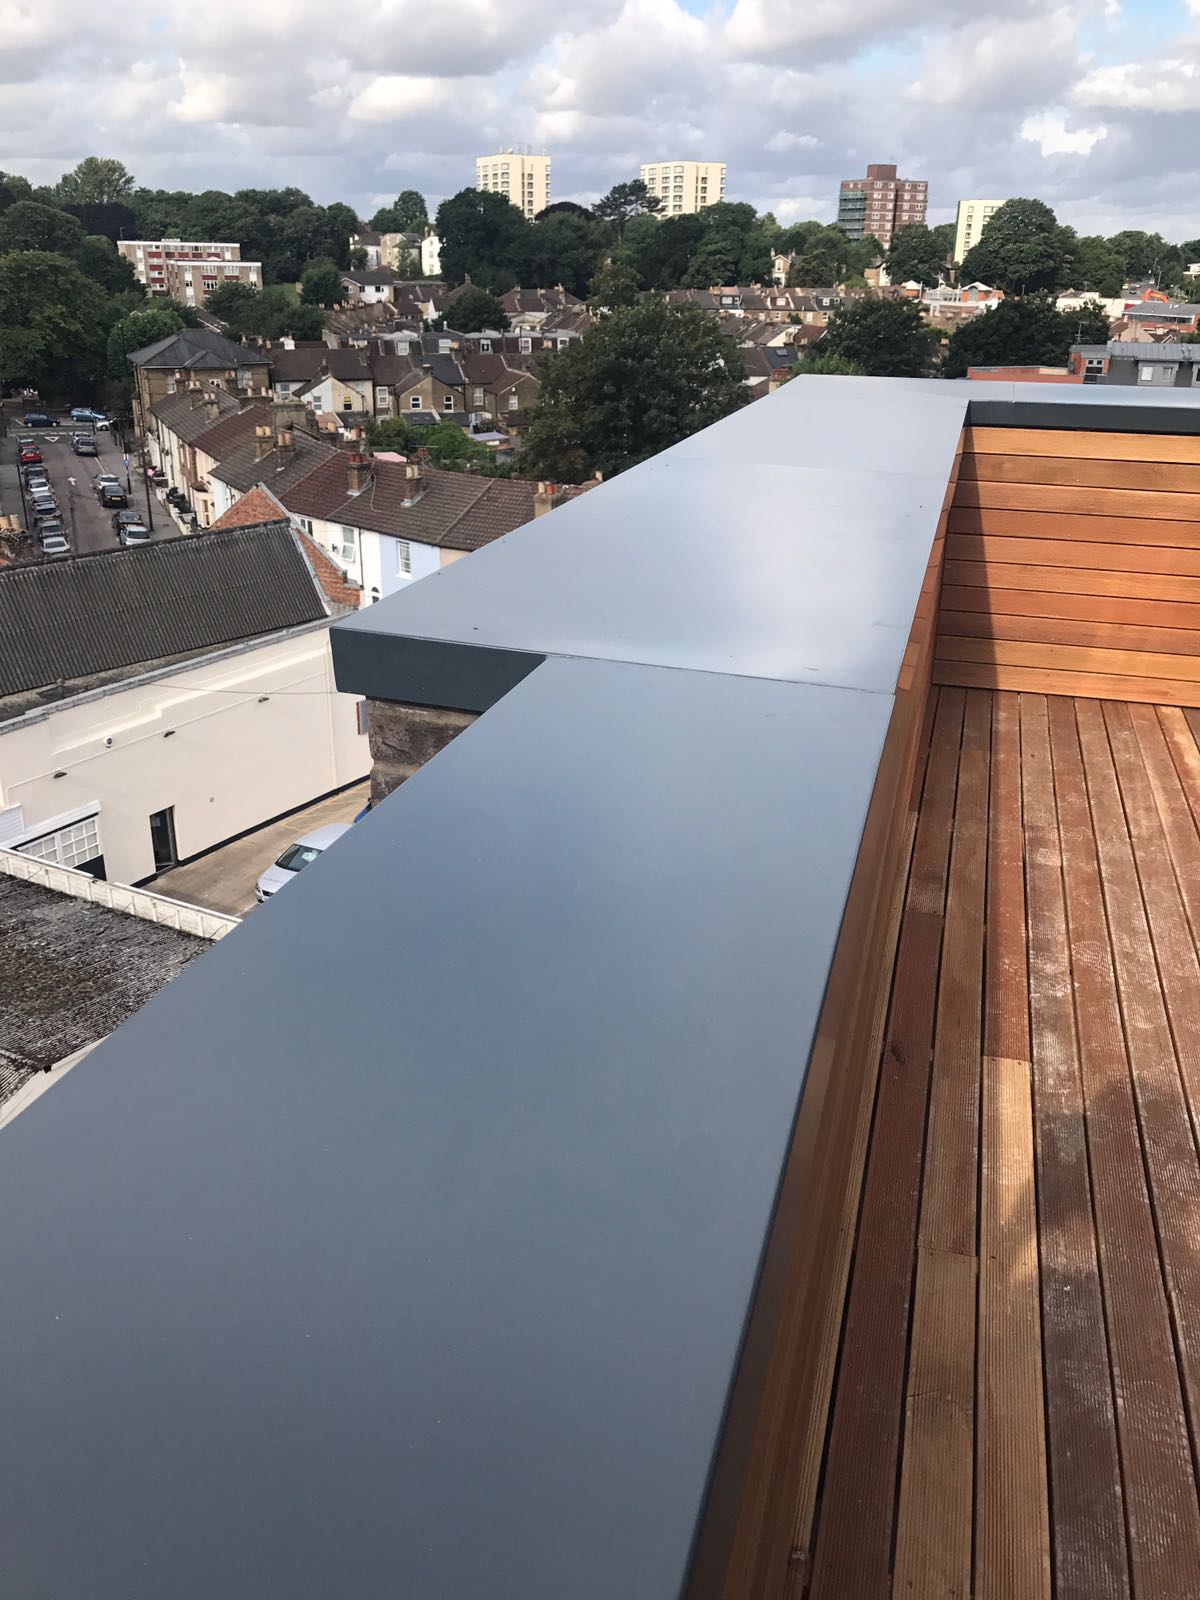 Aluminium Cappings & Flashings designed, supplied and installed in London